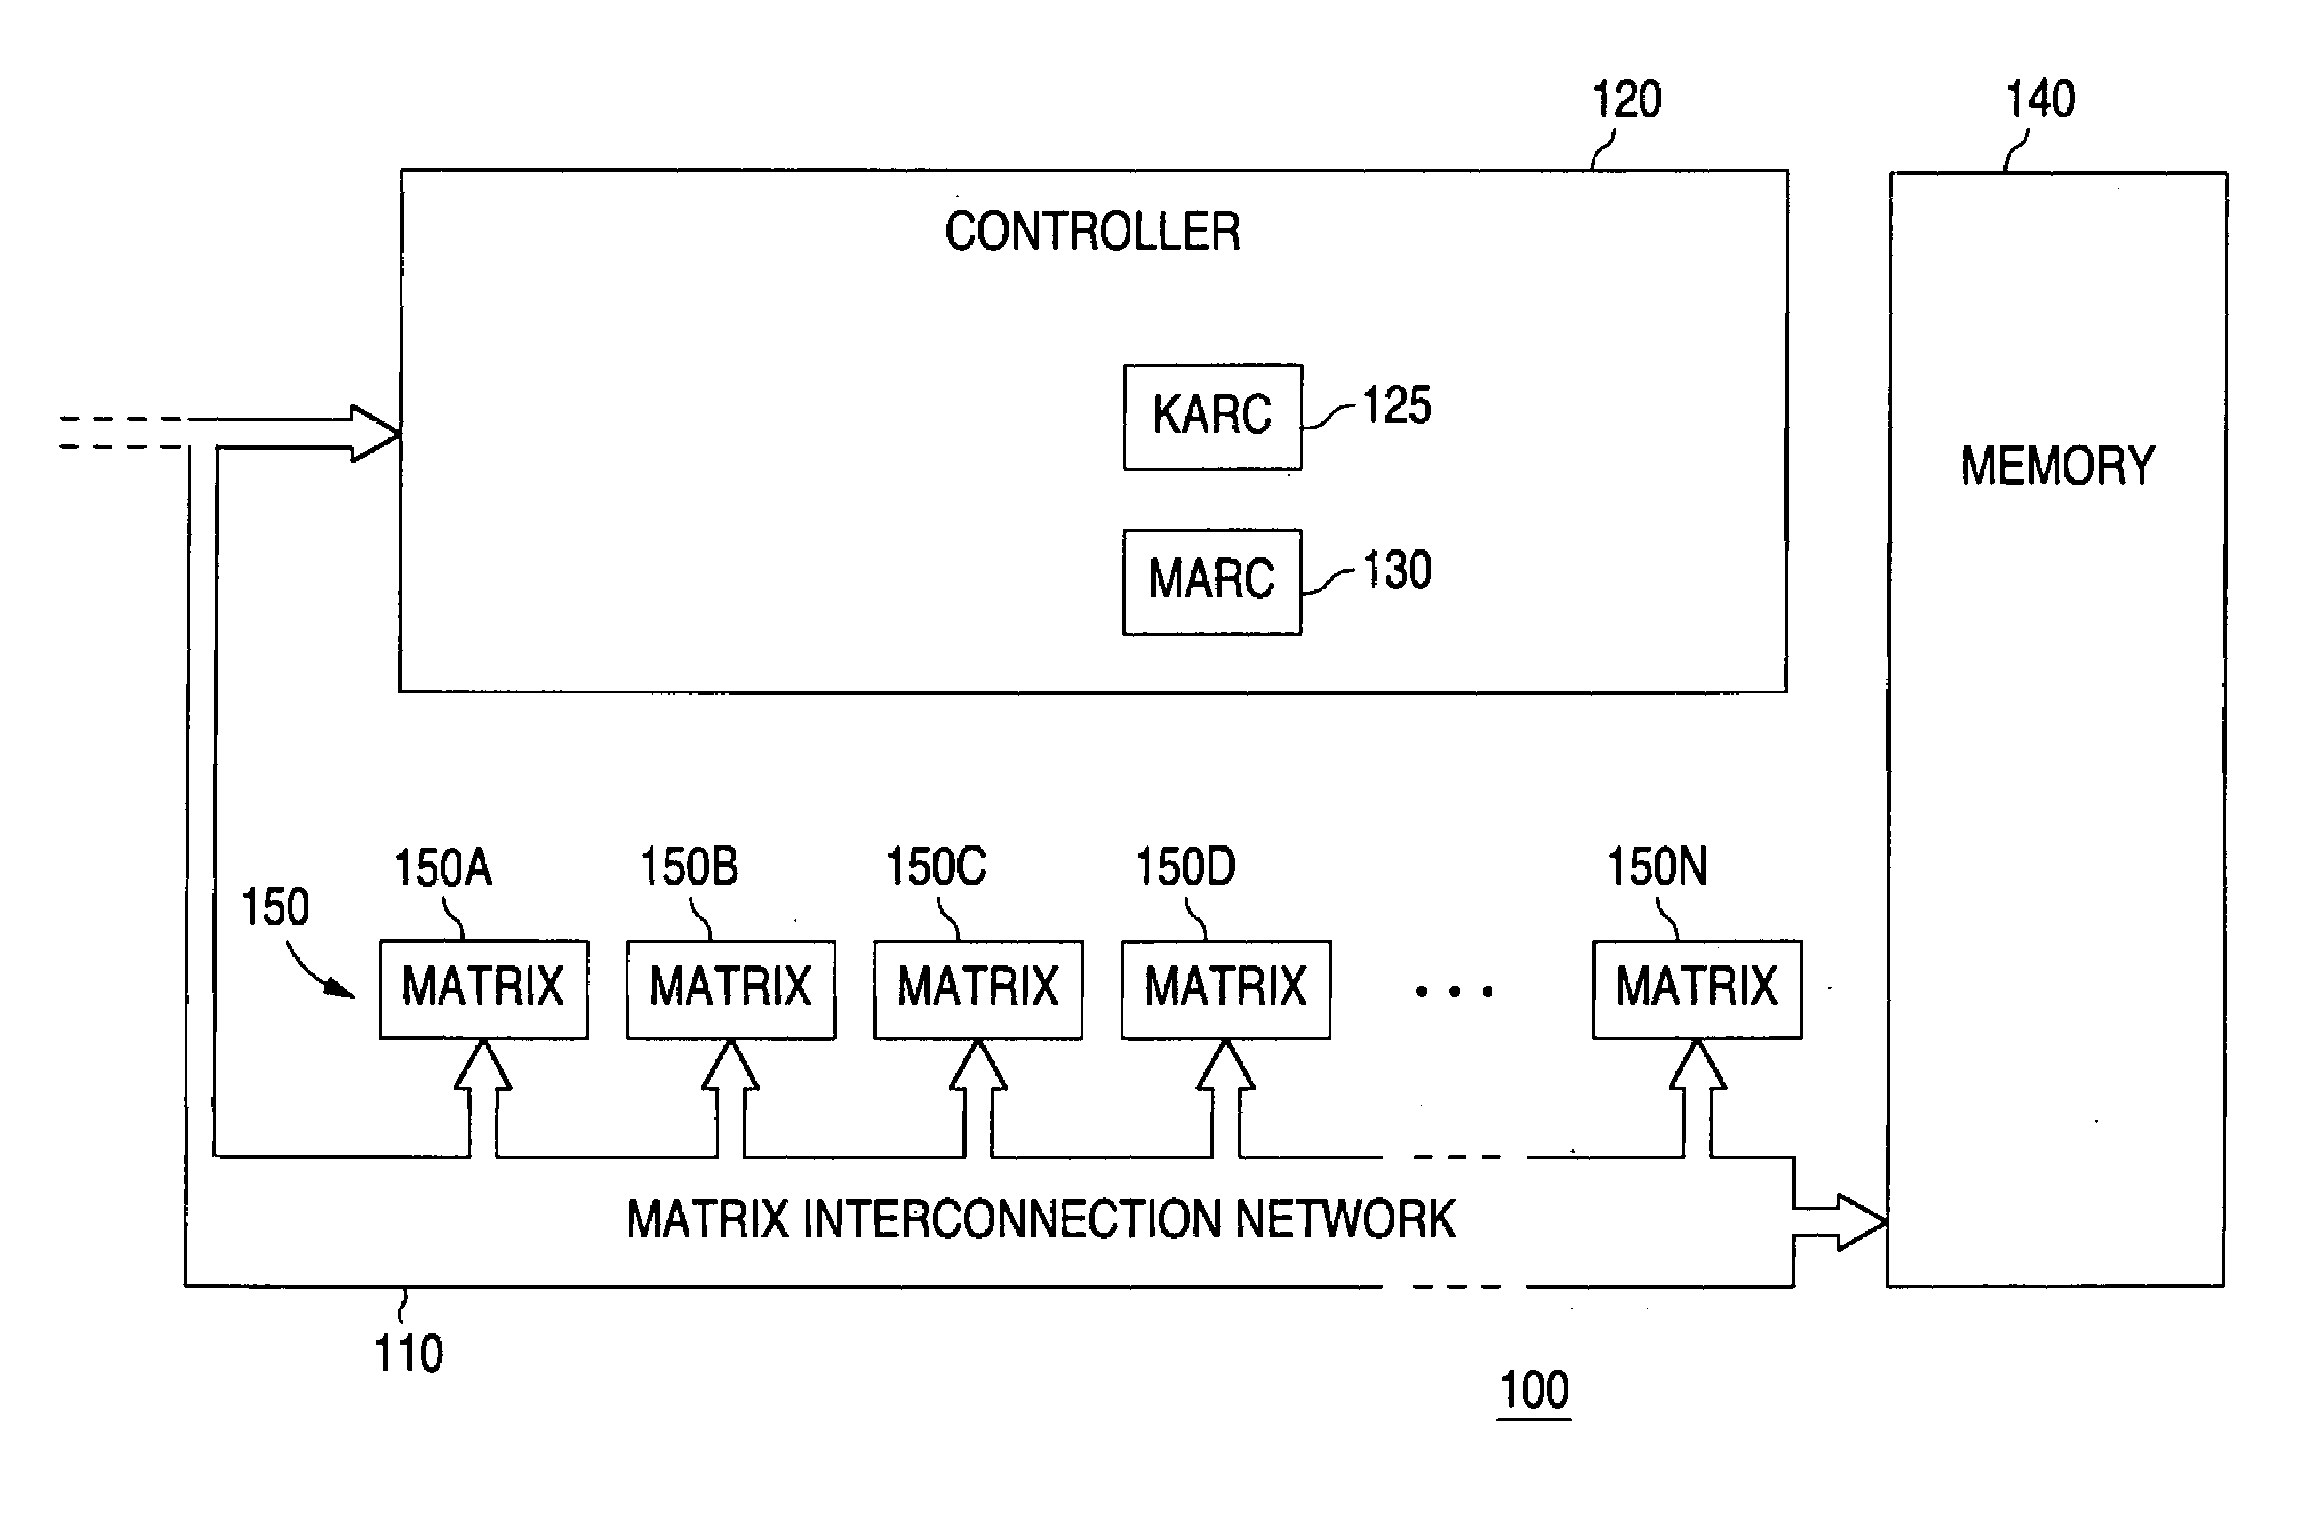 Method and system for creating and programming an adaptive computing engine